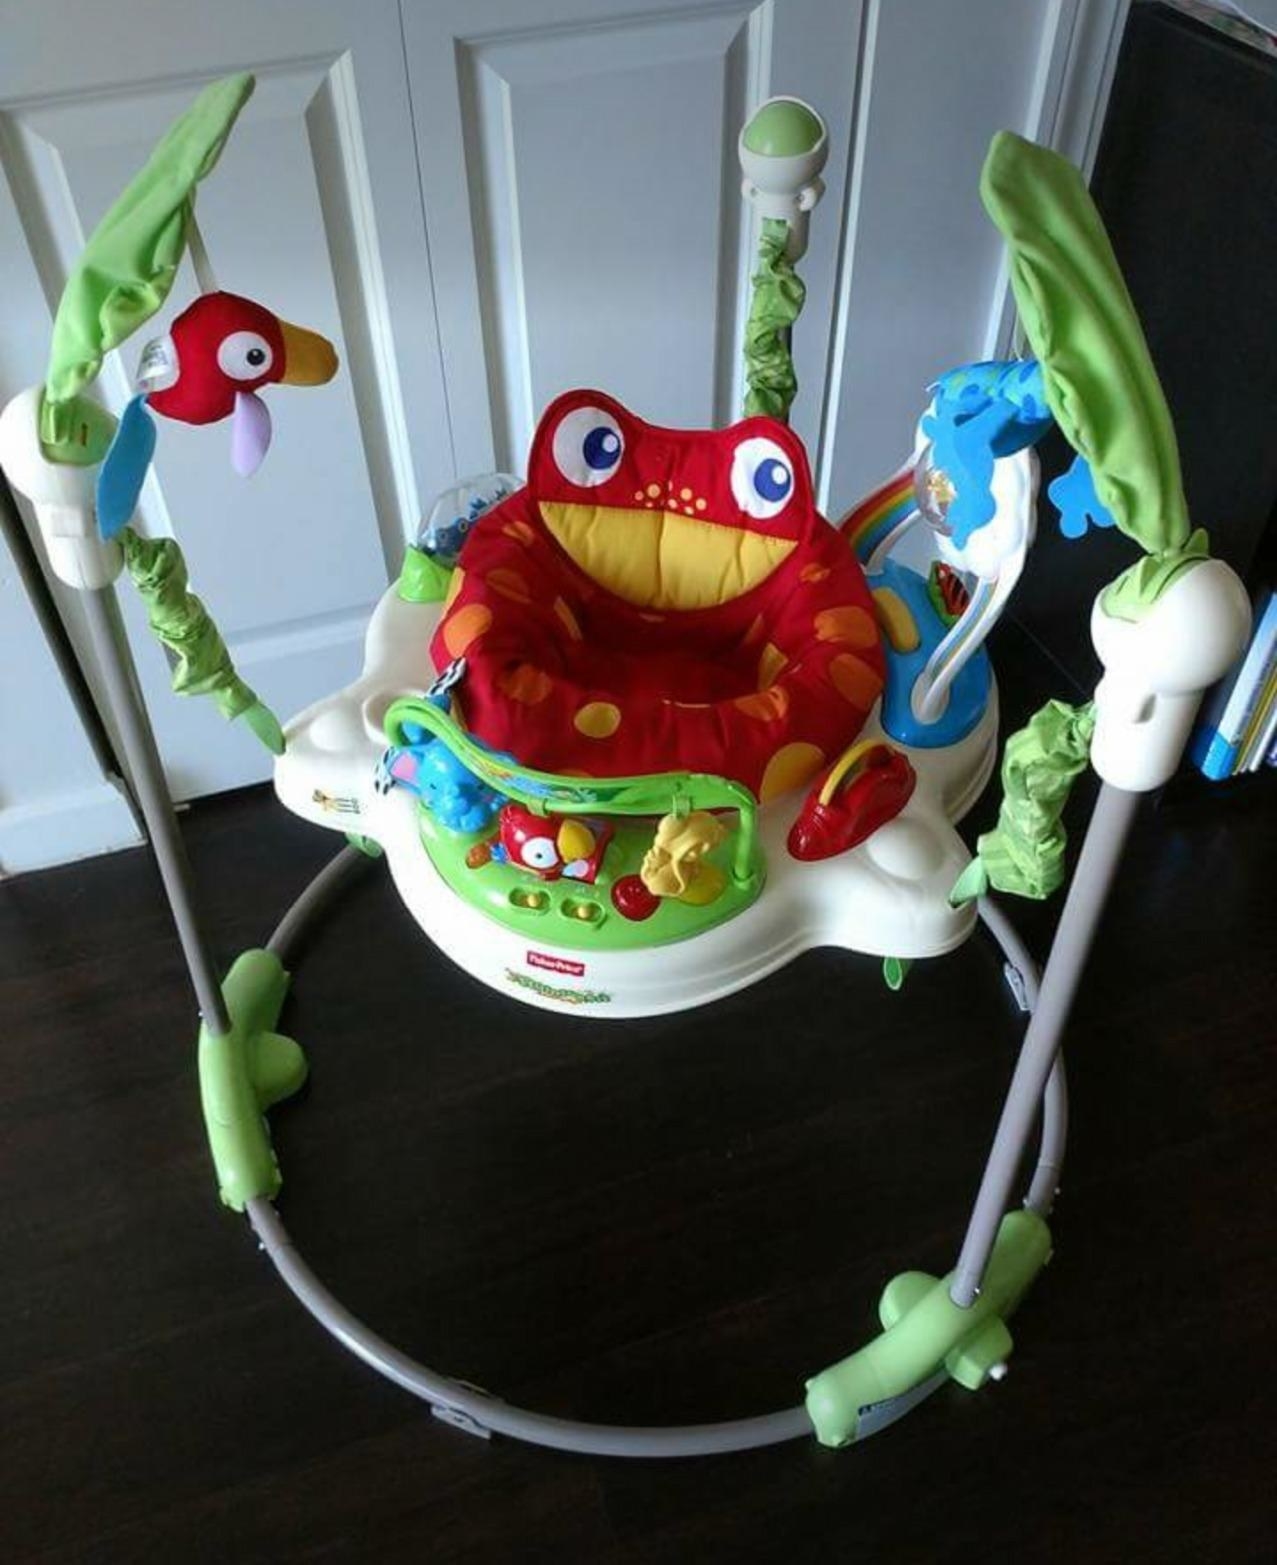 reviewer's photo of the jumperoo